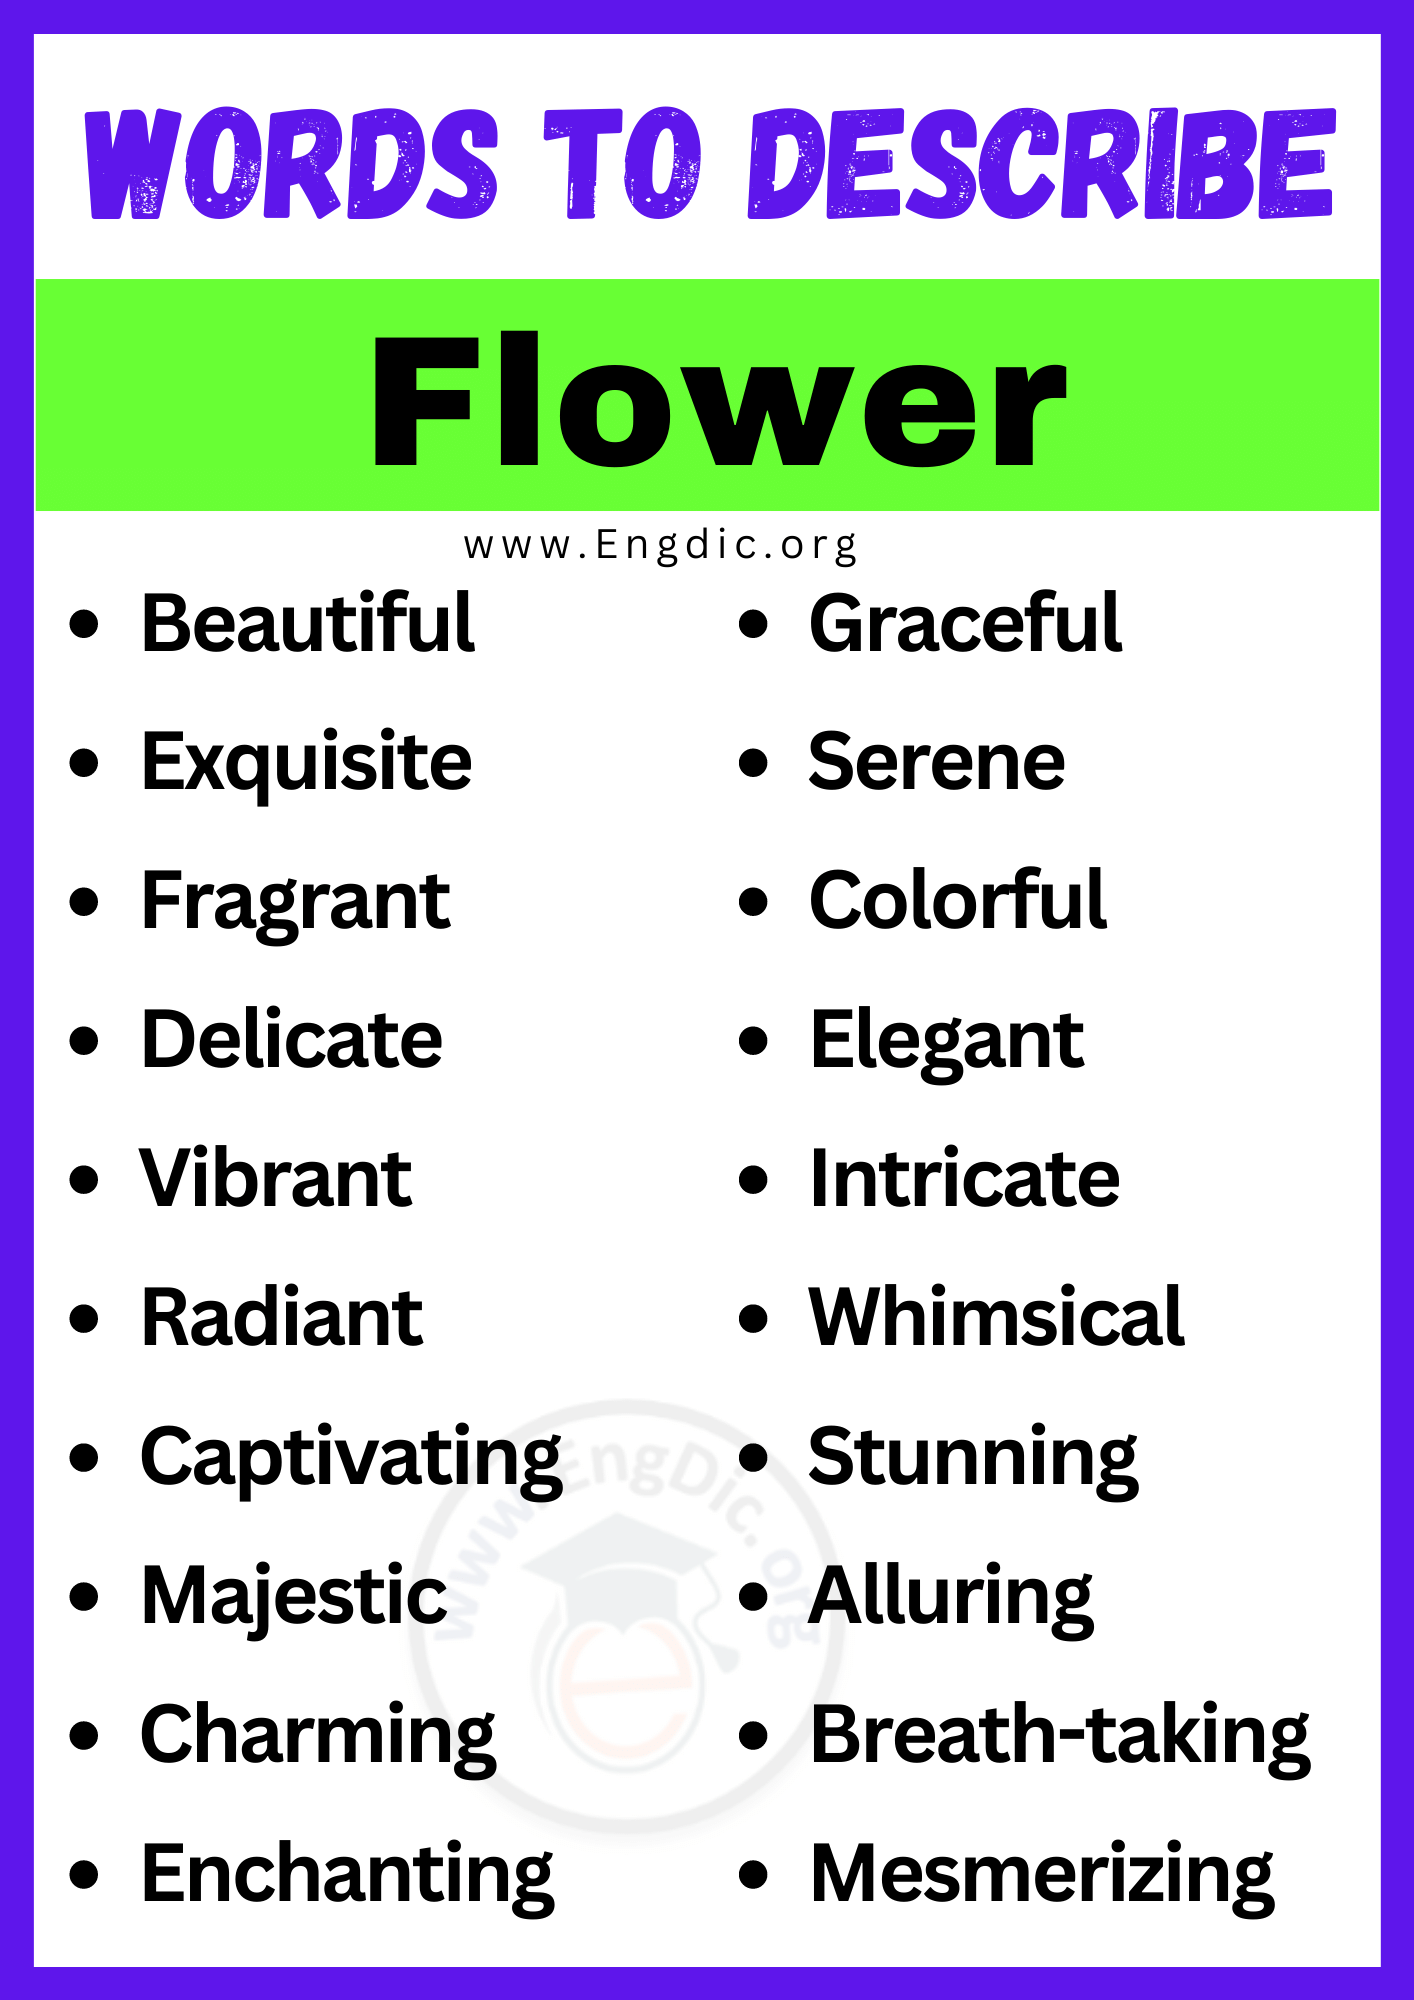 Words to Describe Flower